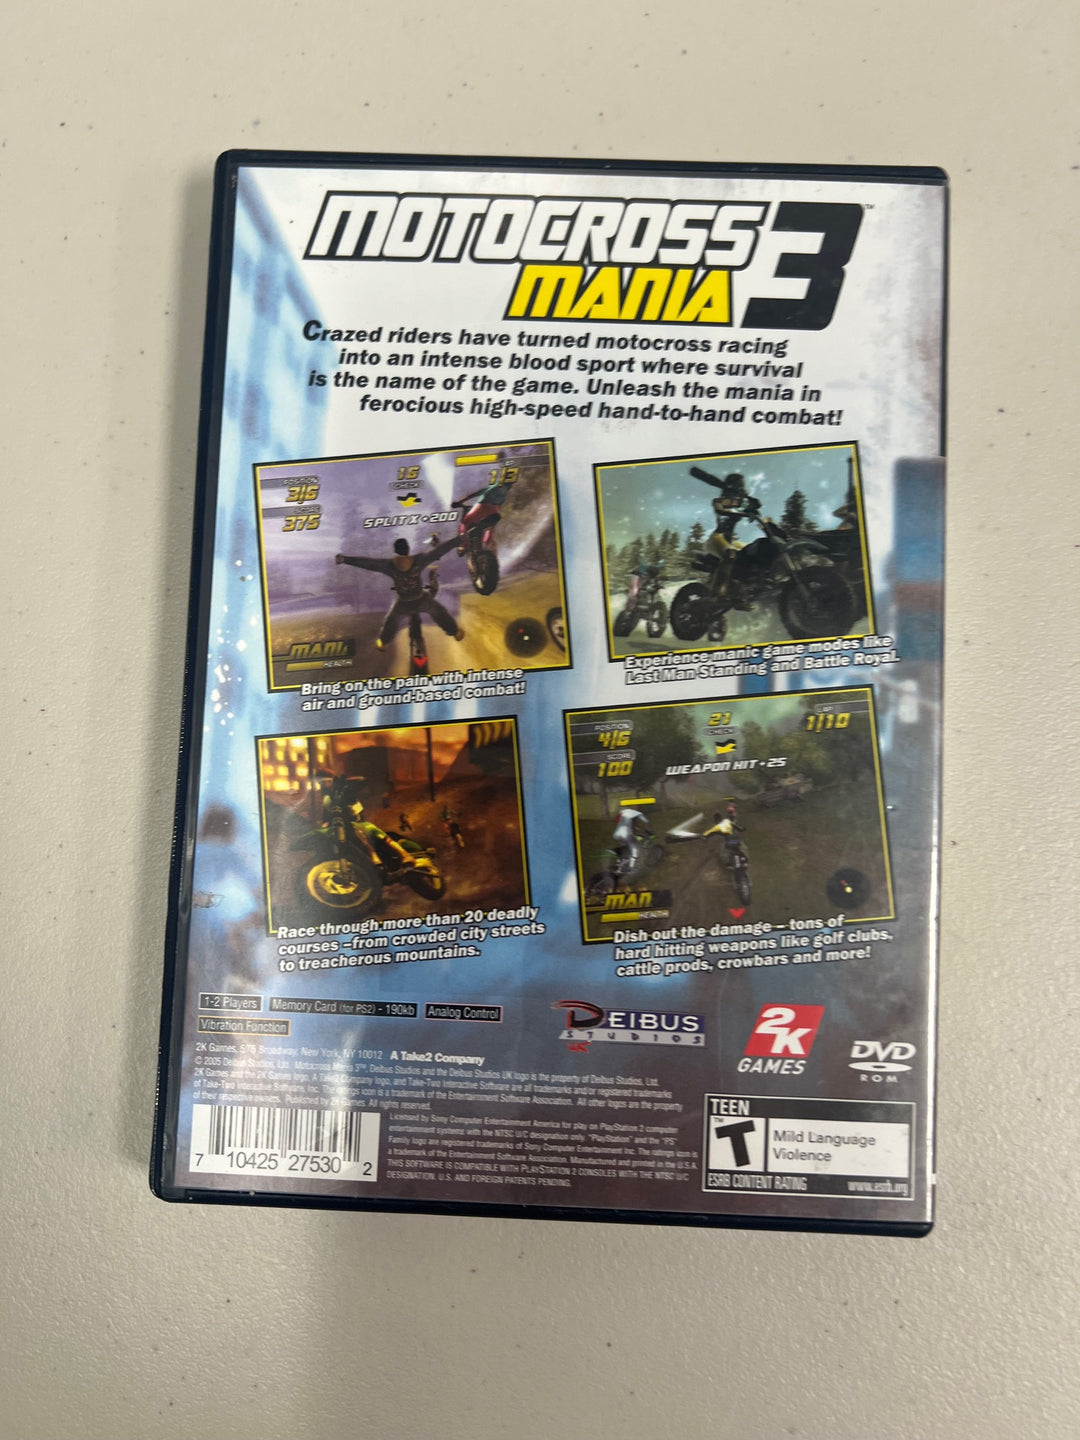 Motocross Mania 3 for Playstation 2 PS2 in case. Tested and Working.     DO63024